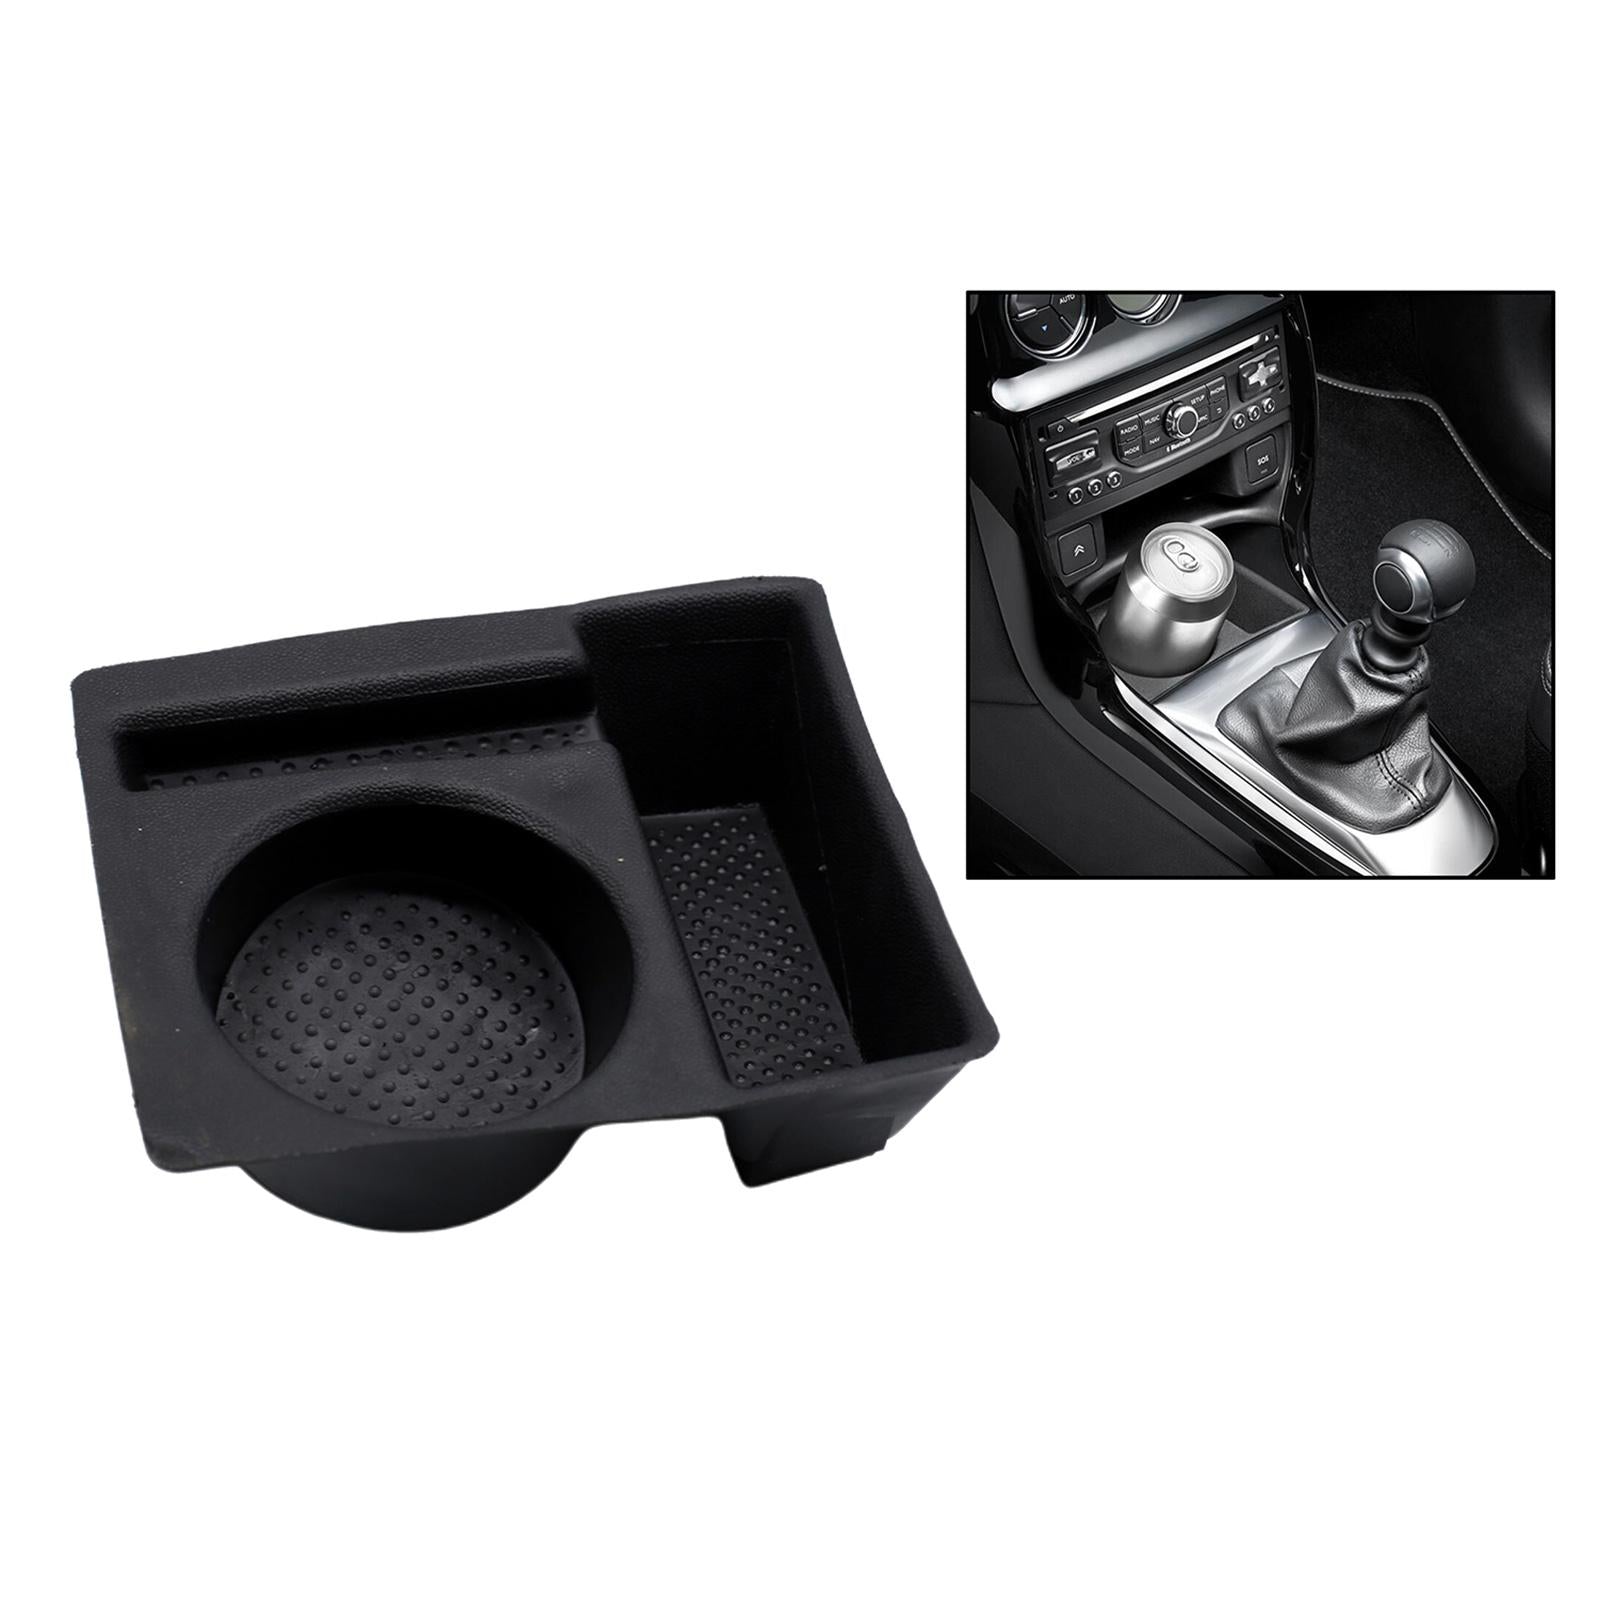 00244872 Cup Holder Water Cup Fit for Citroen DS3 Beverage Drink Black